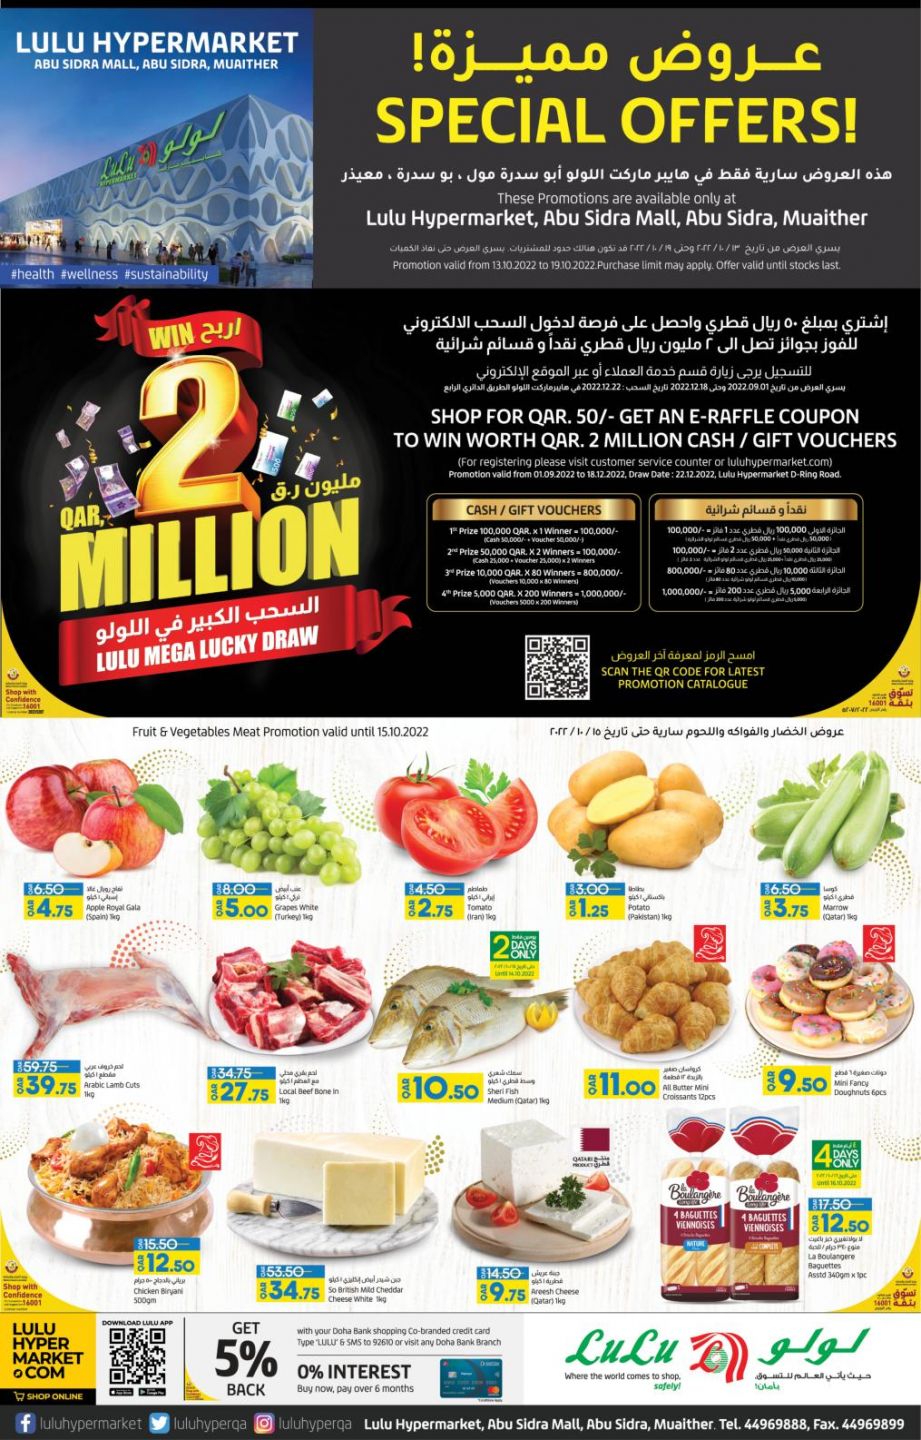 LuLu Hypermarket launches exciting 'Let's Connect' promotion and deals -  Doha News | Qatar